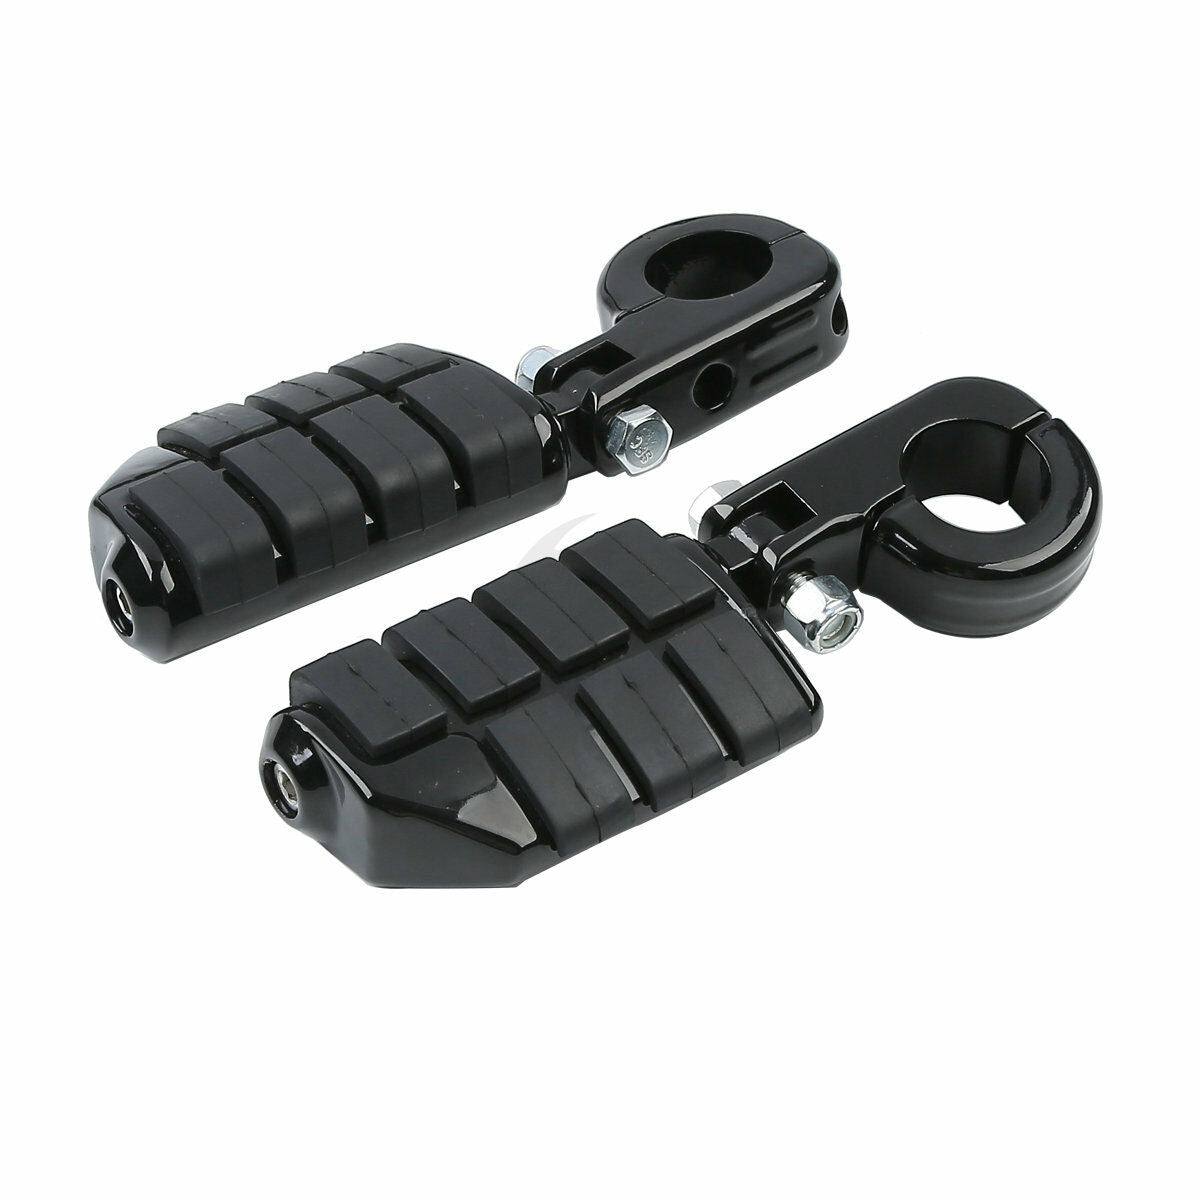 Universal 1.25" Highway Bar Foot Pegs Footrest W/ Mount For Harley Honda Yamaha - Moto Life Products